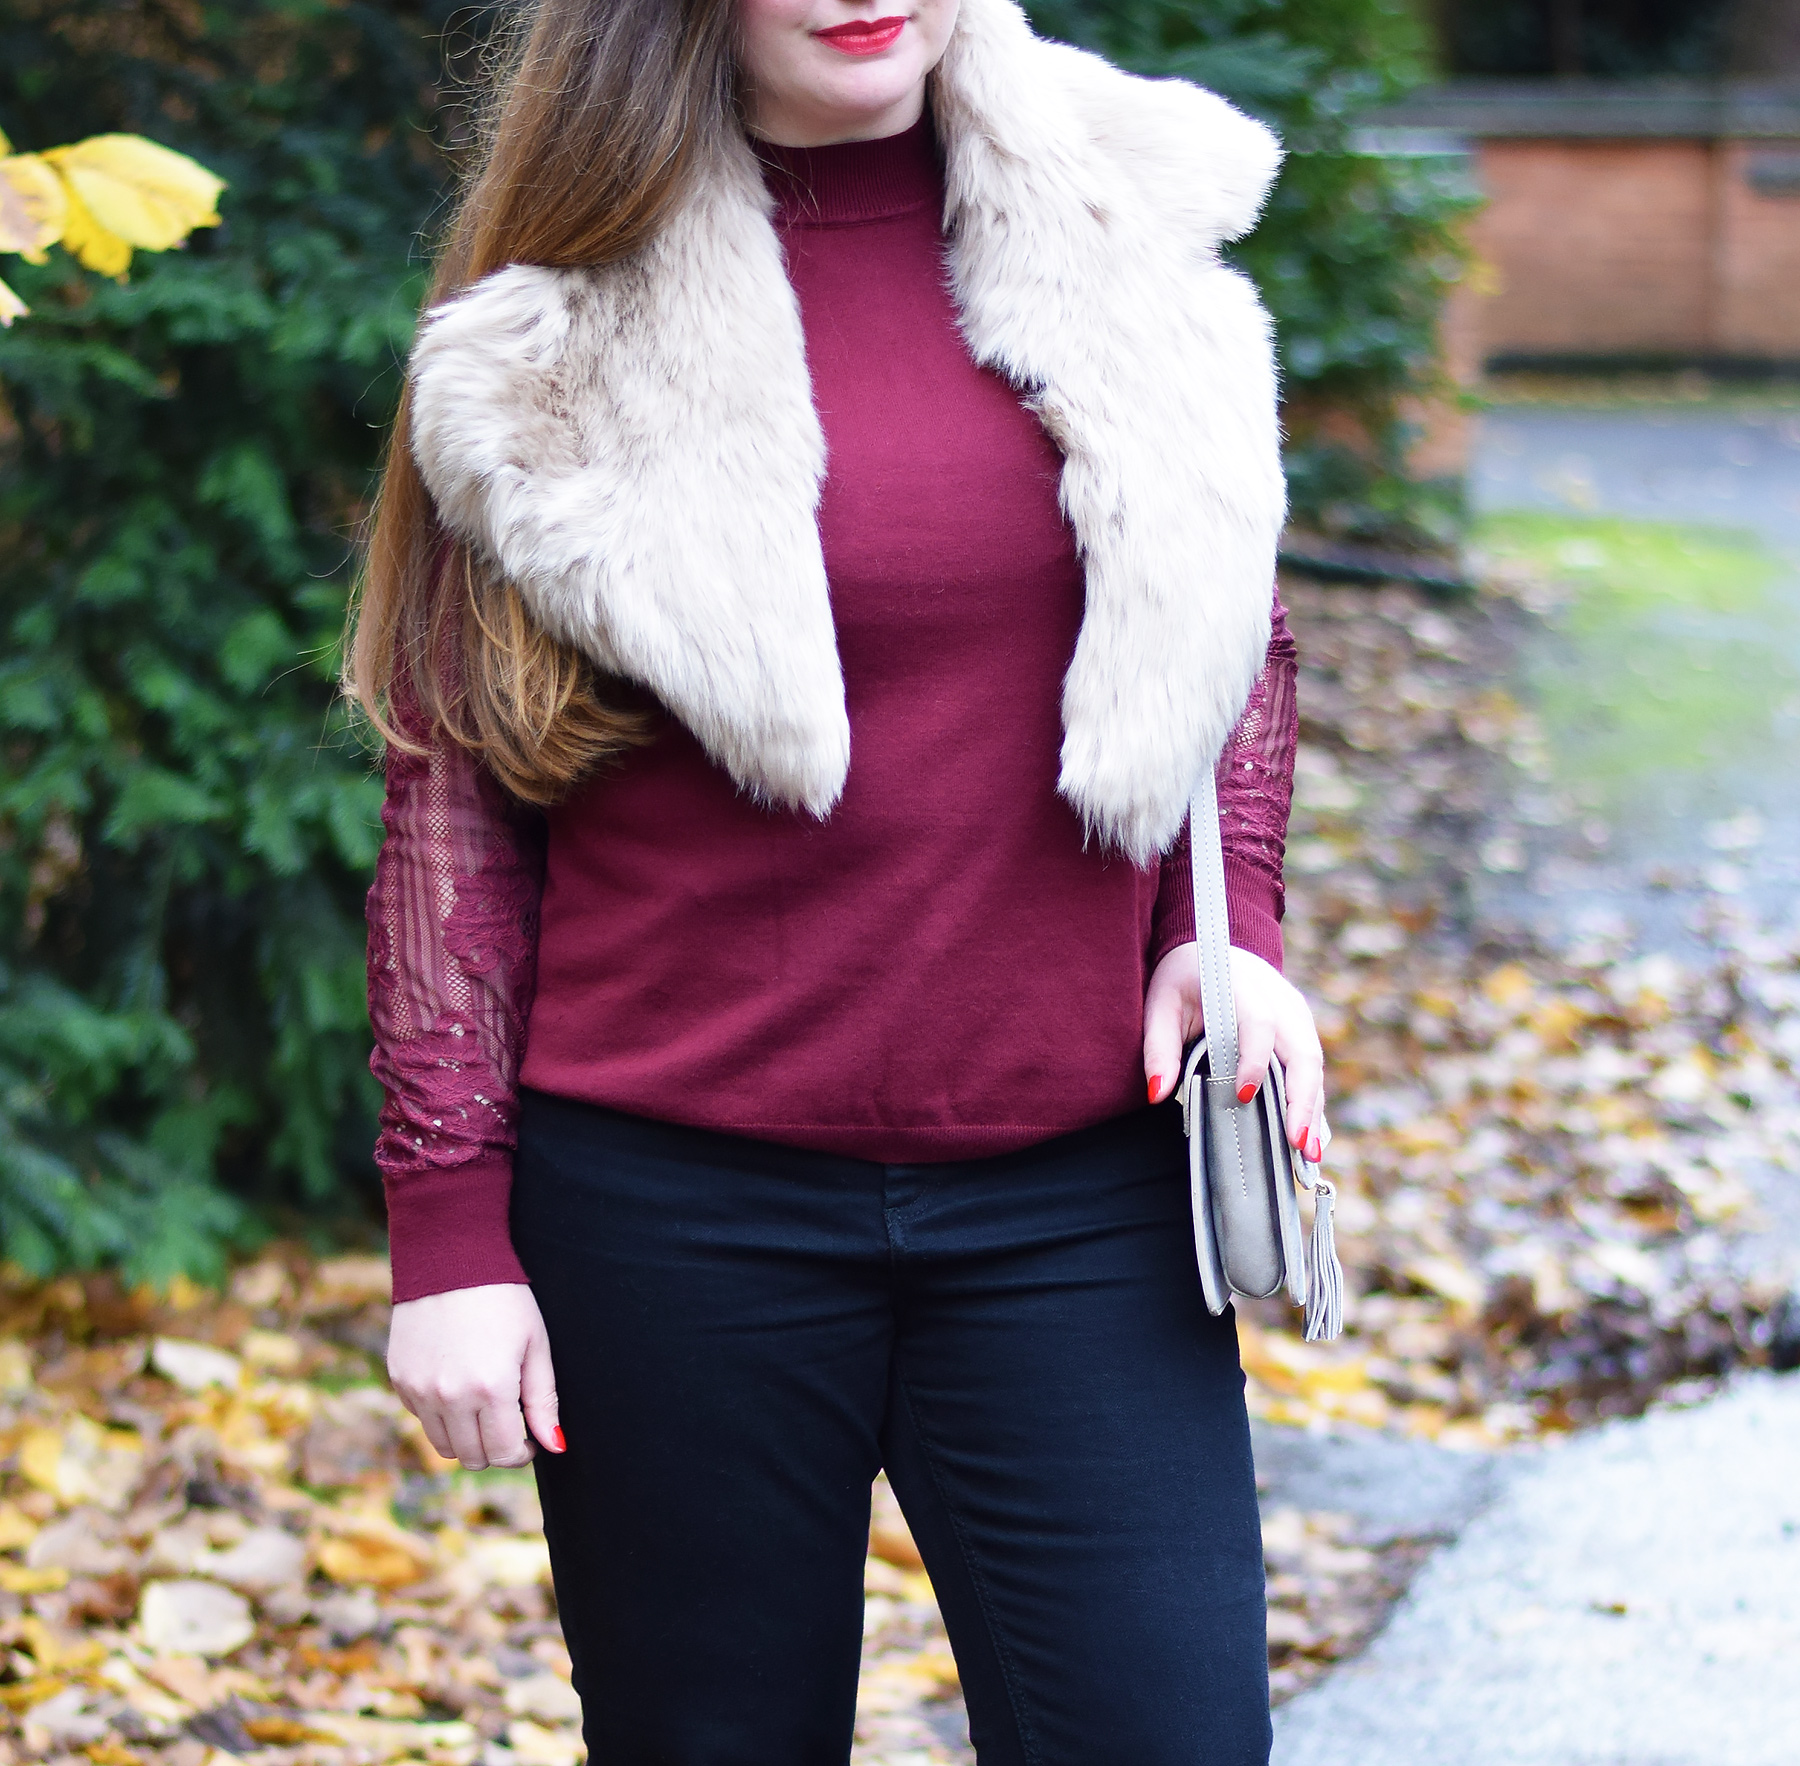 Festive daytime outfit ideas